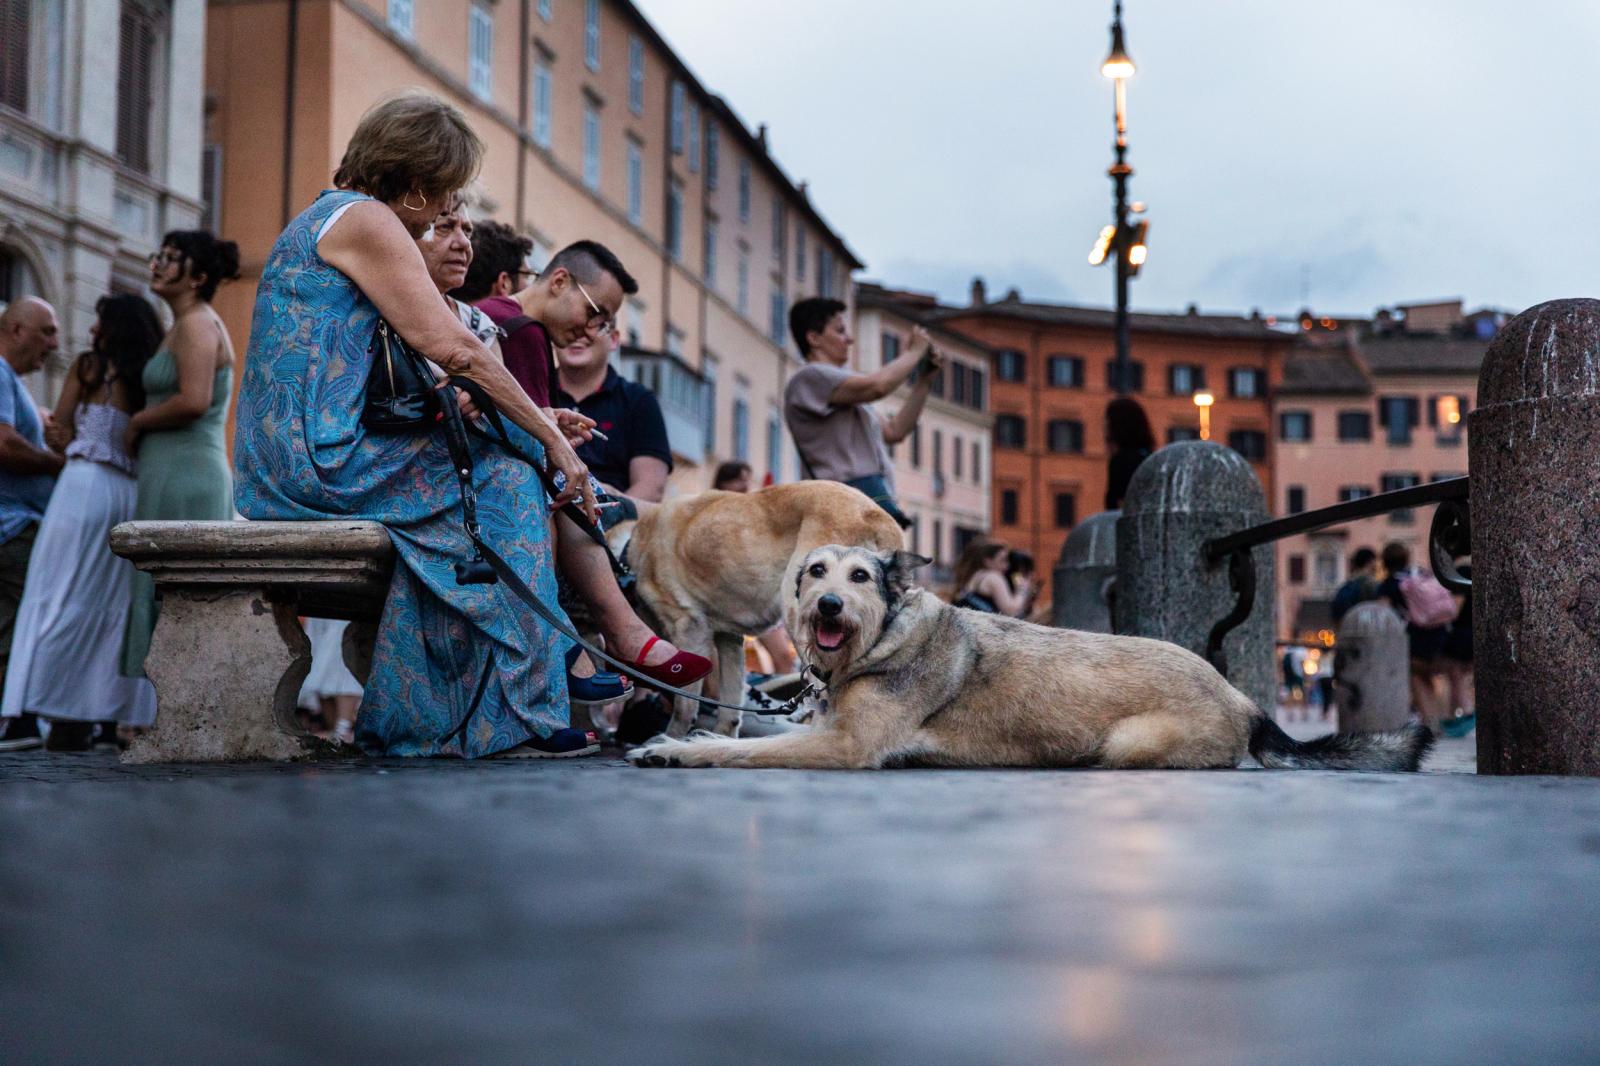 Dogs relax while owners smoke along the Piazza Navona in Rome.